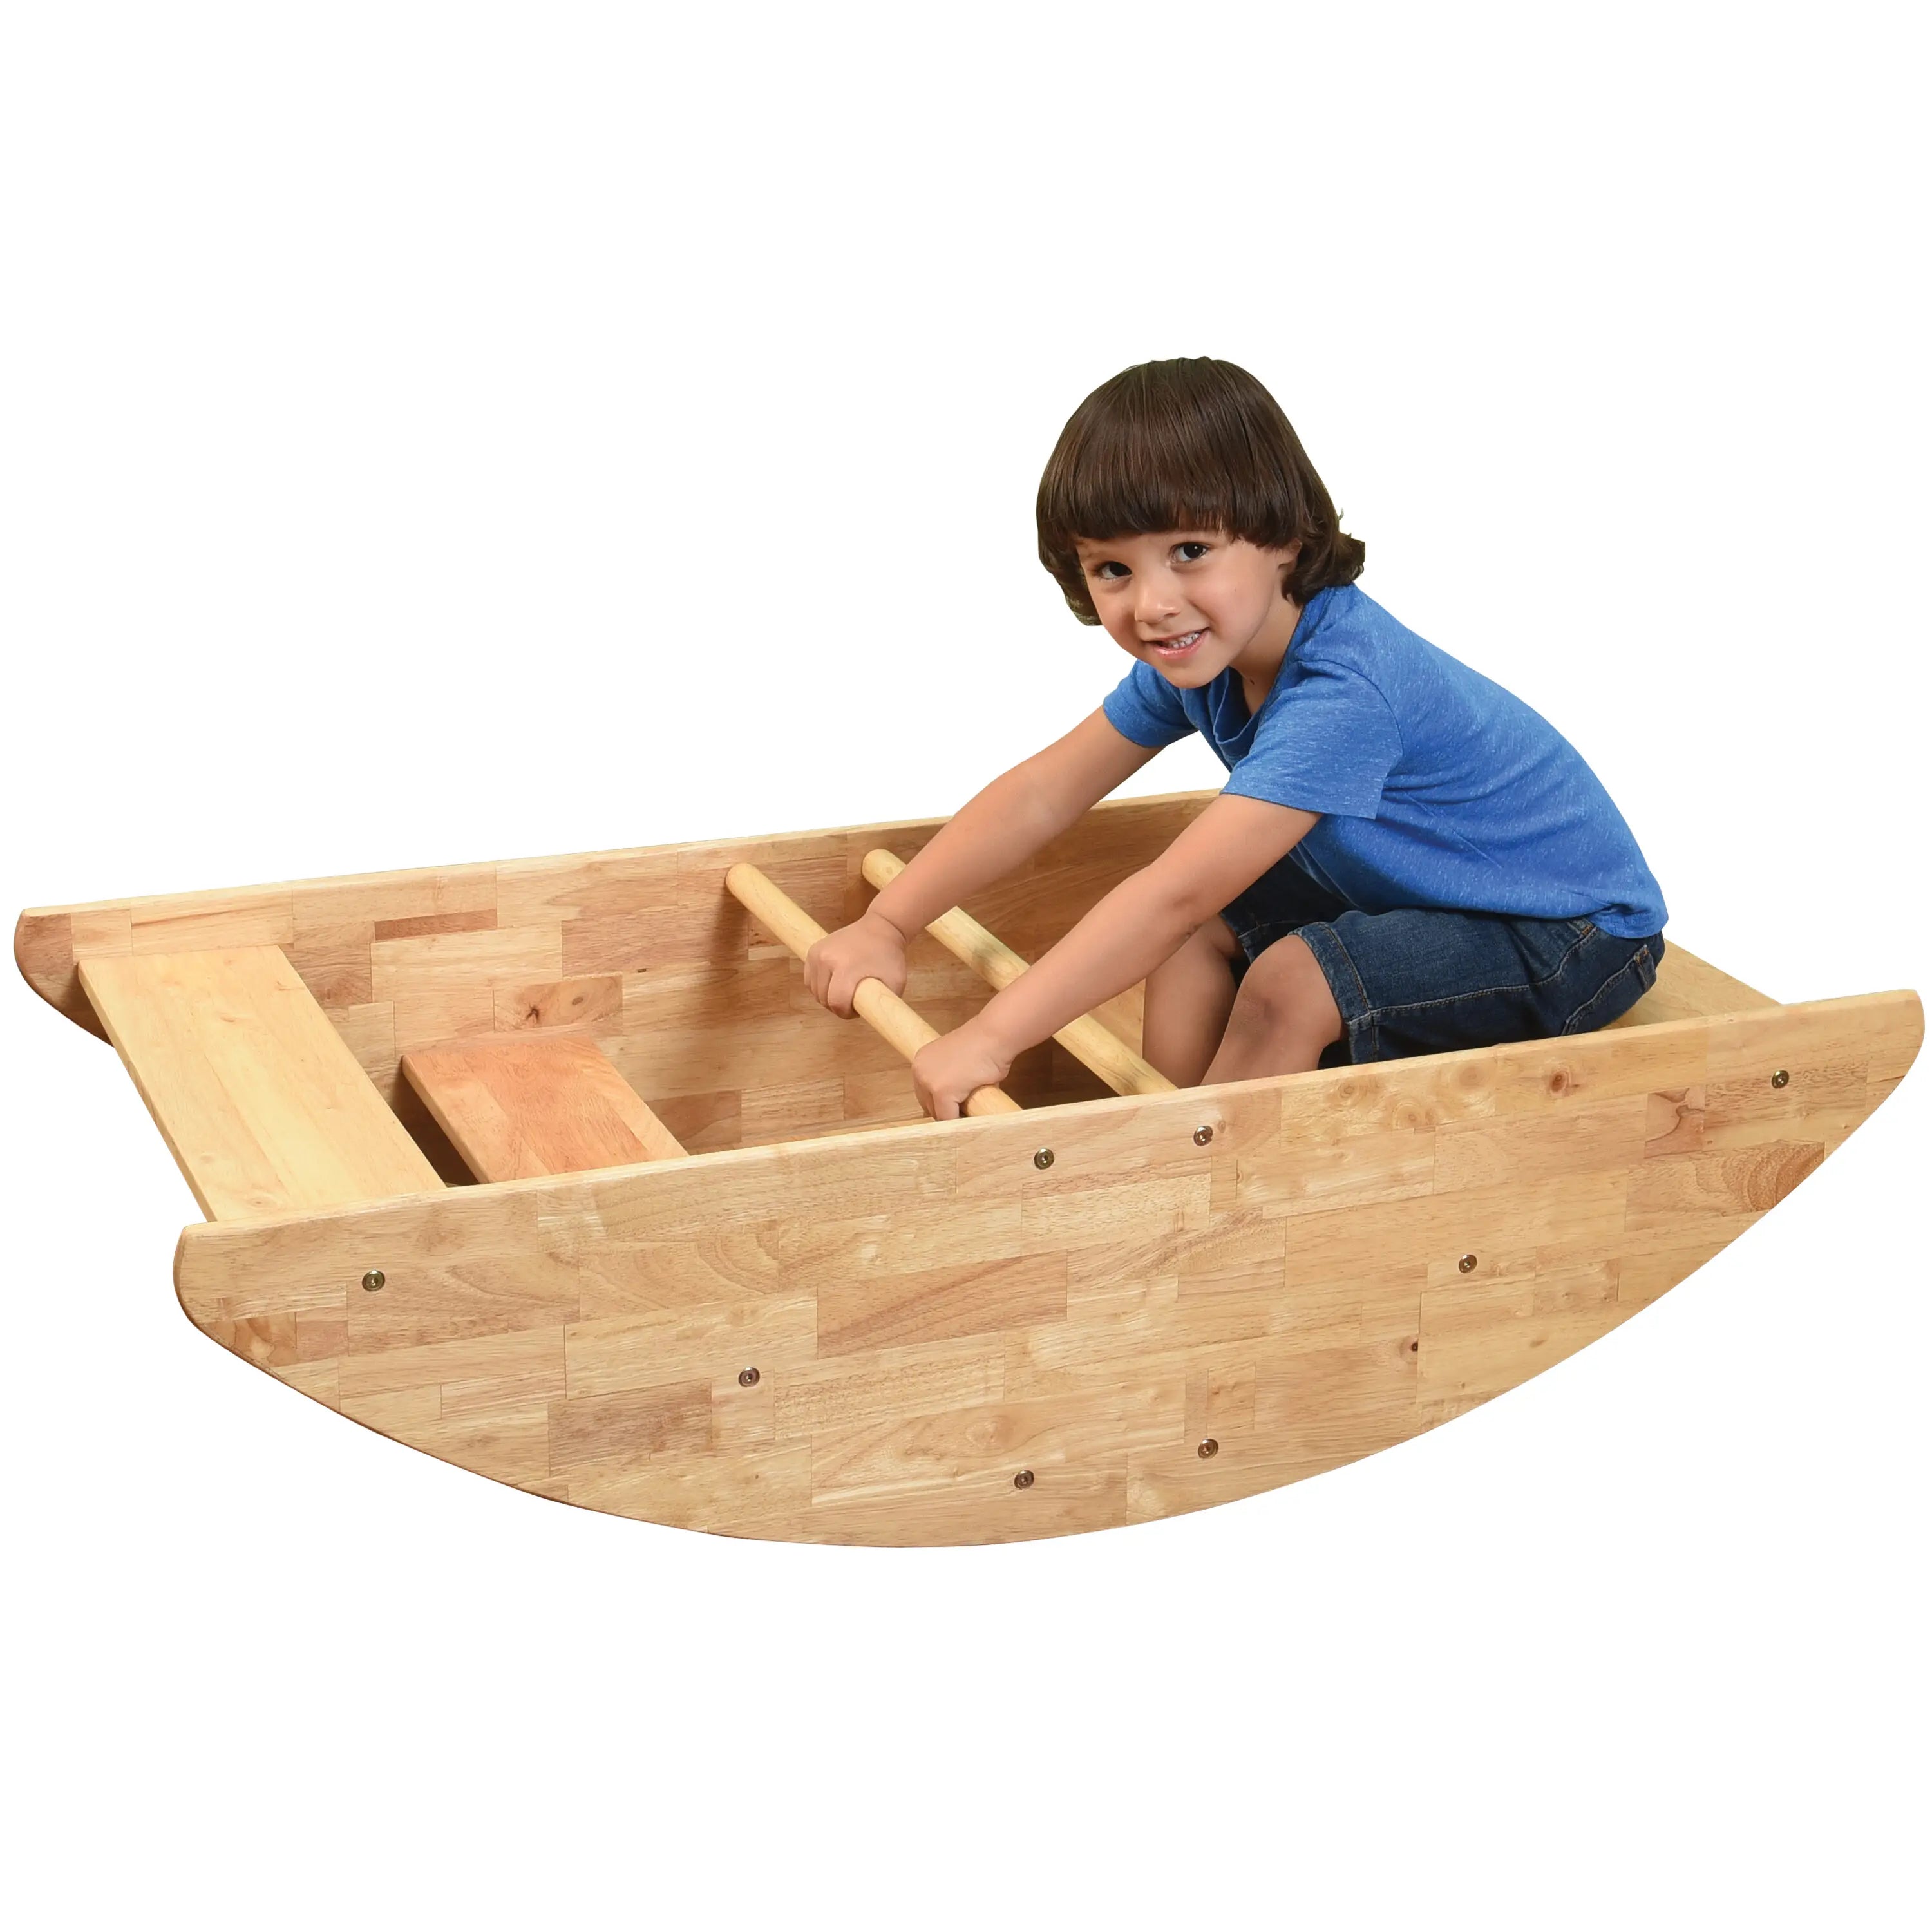 Wooden Rocking Boat Riding Toy